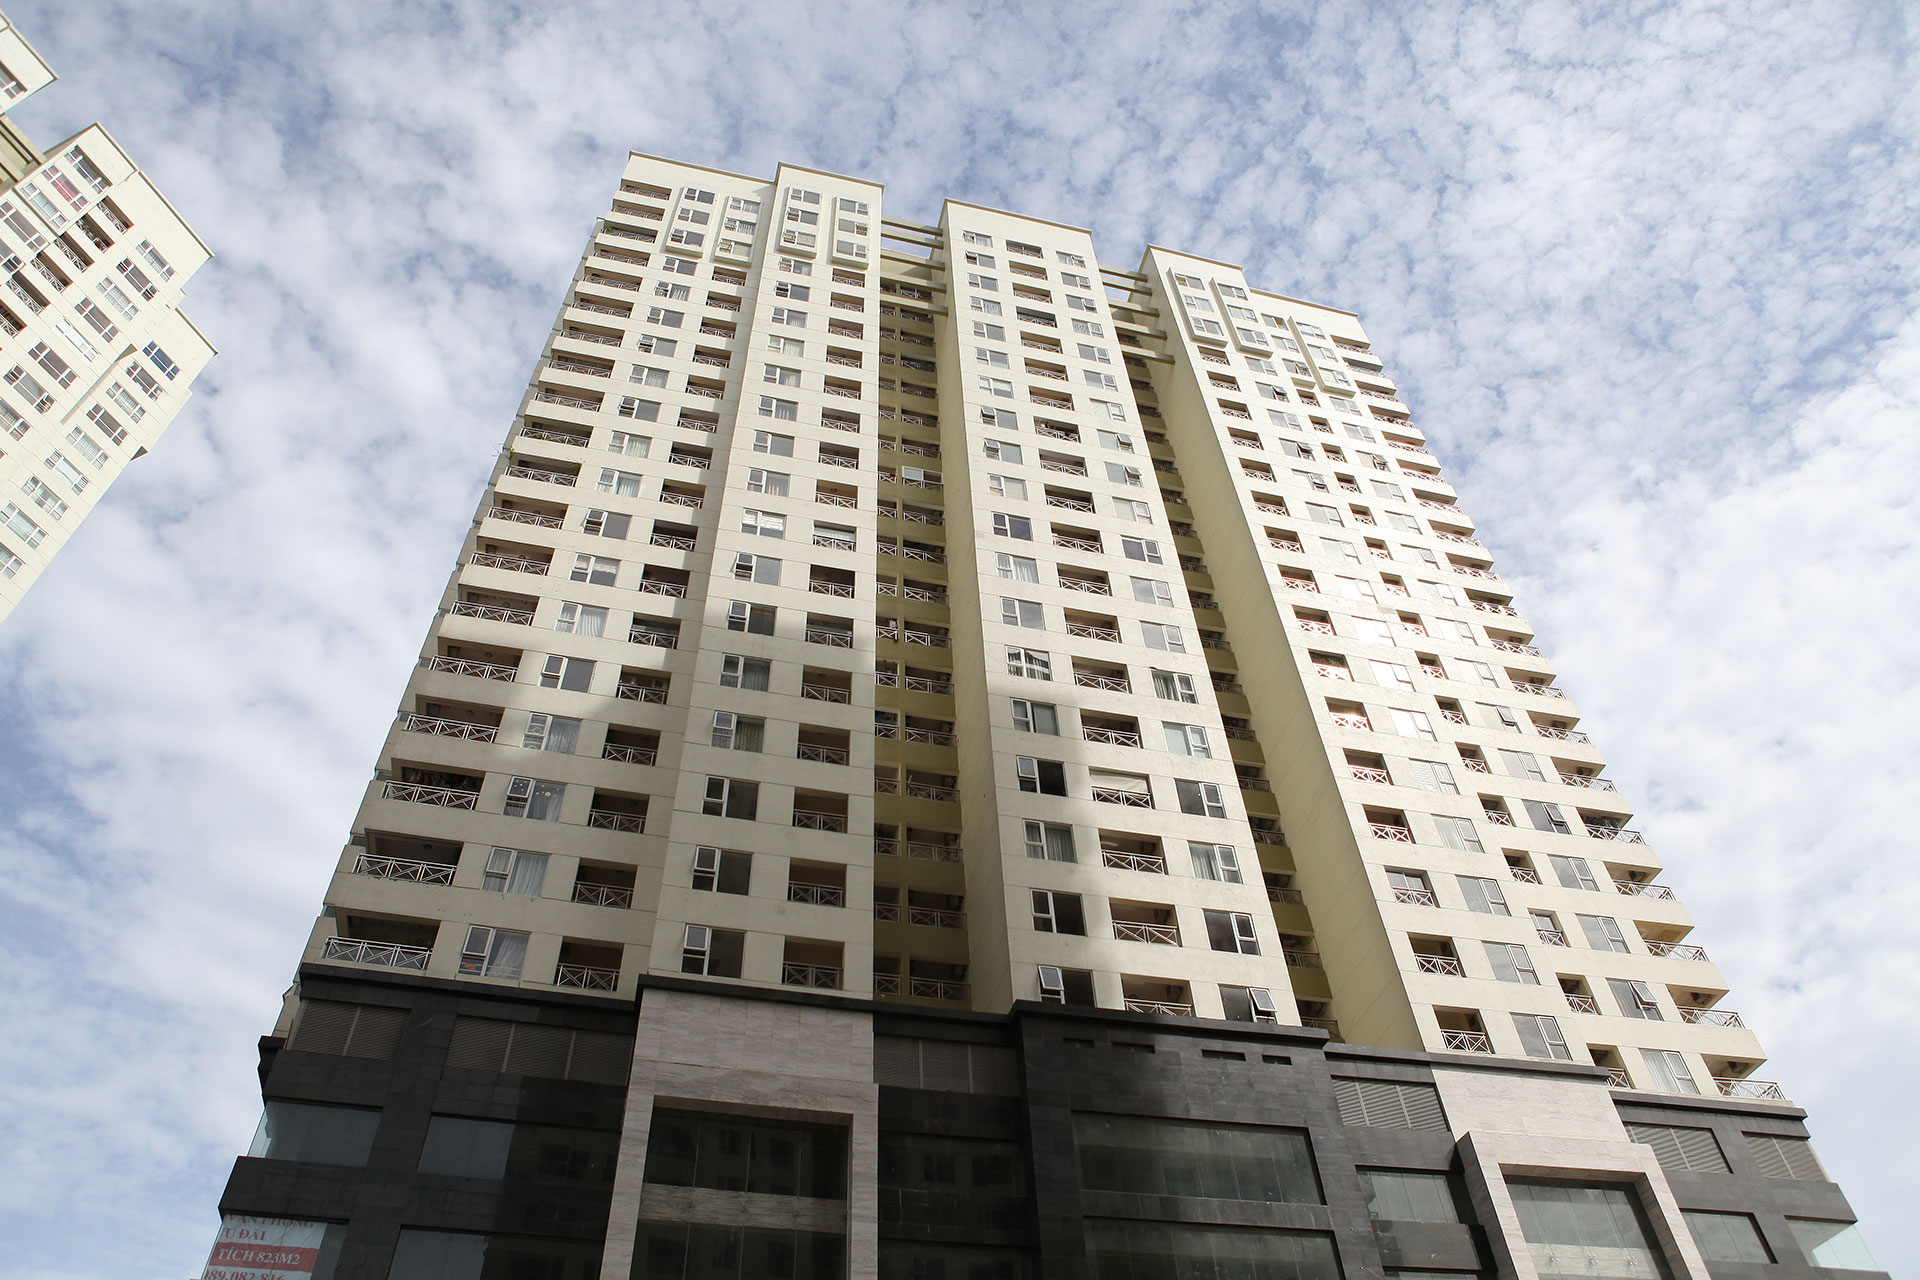 The mixed high-rise housing NO5 project (2008-2012)